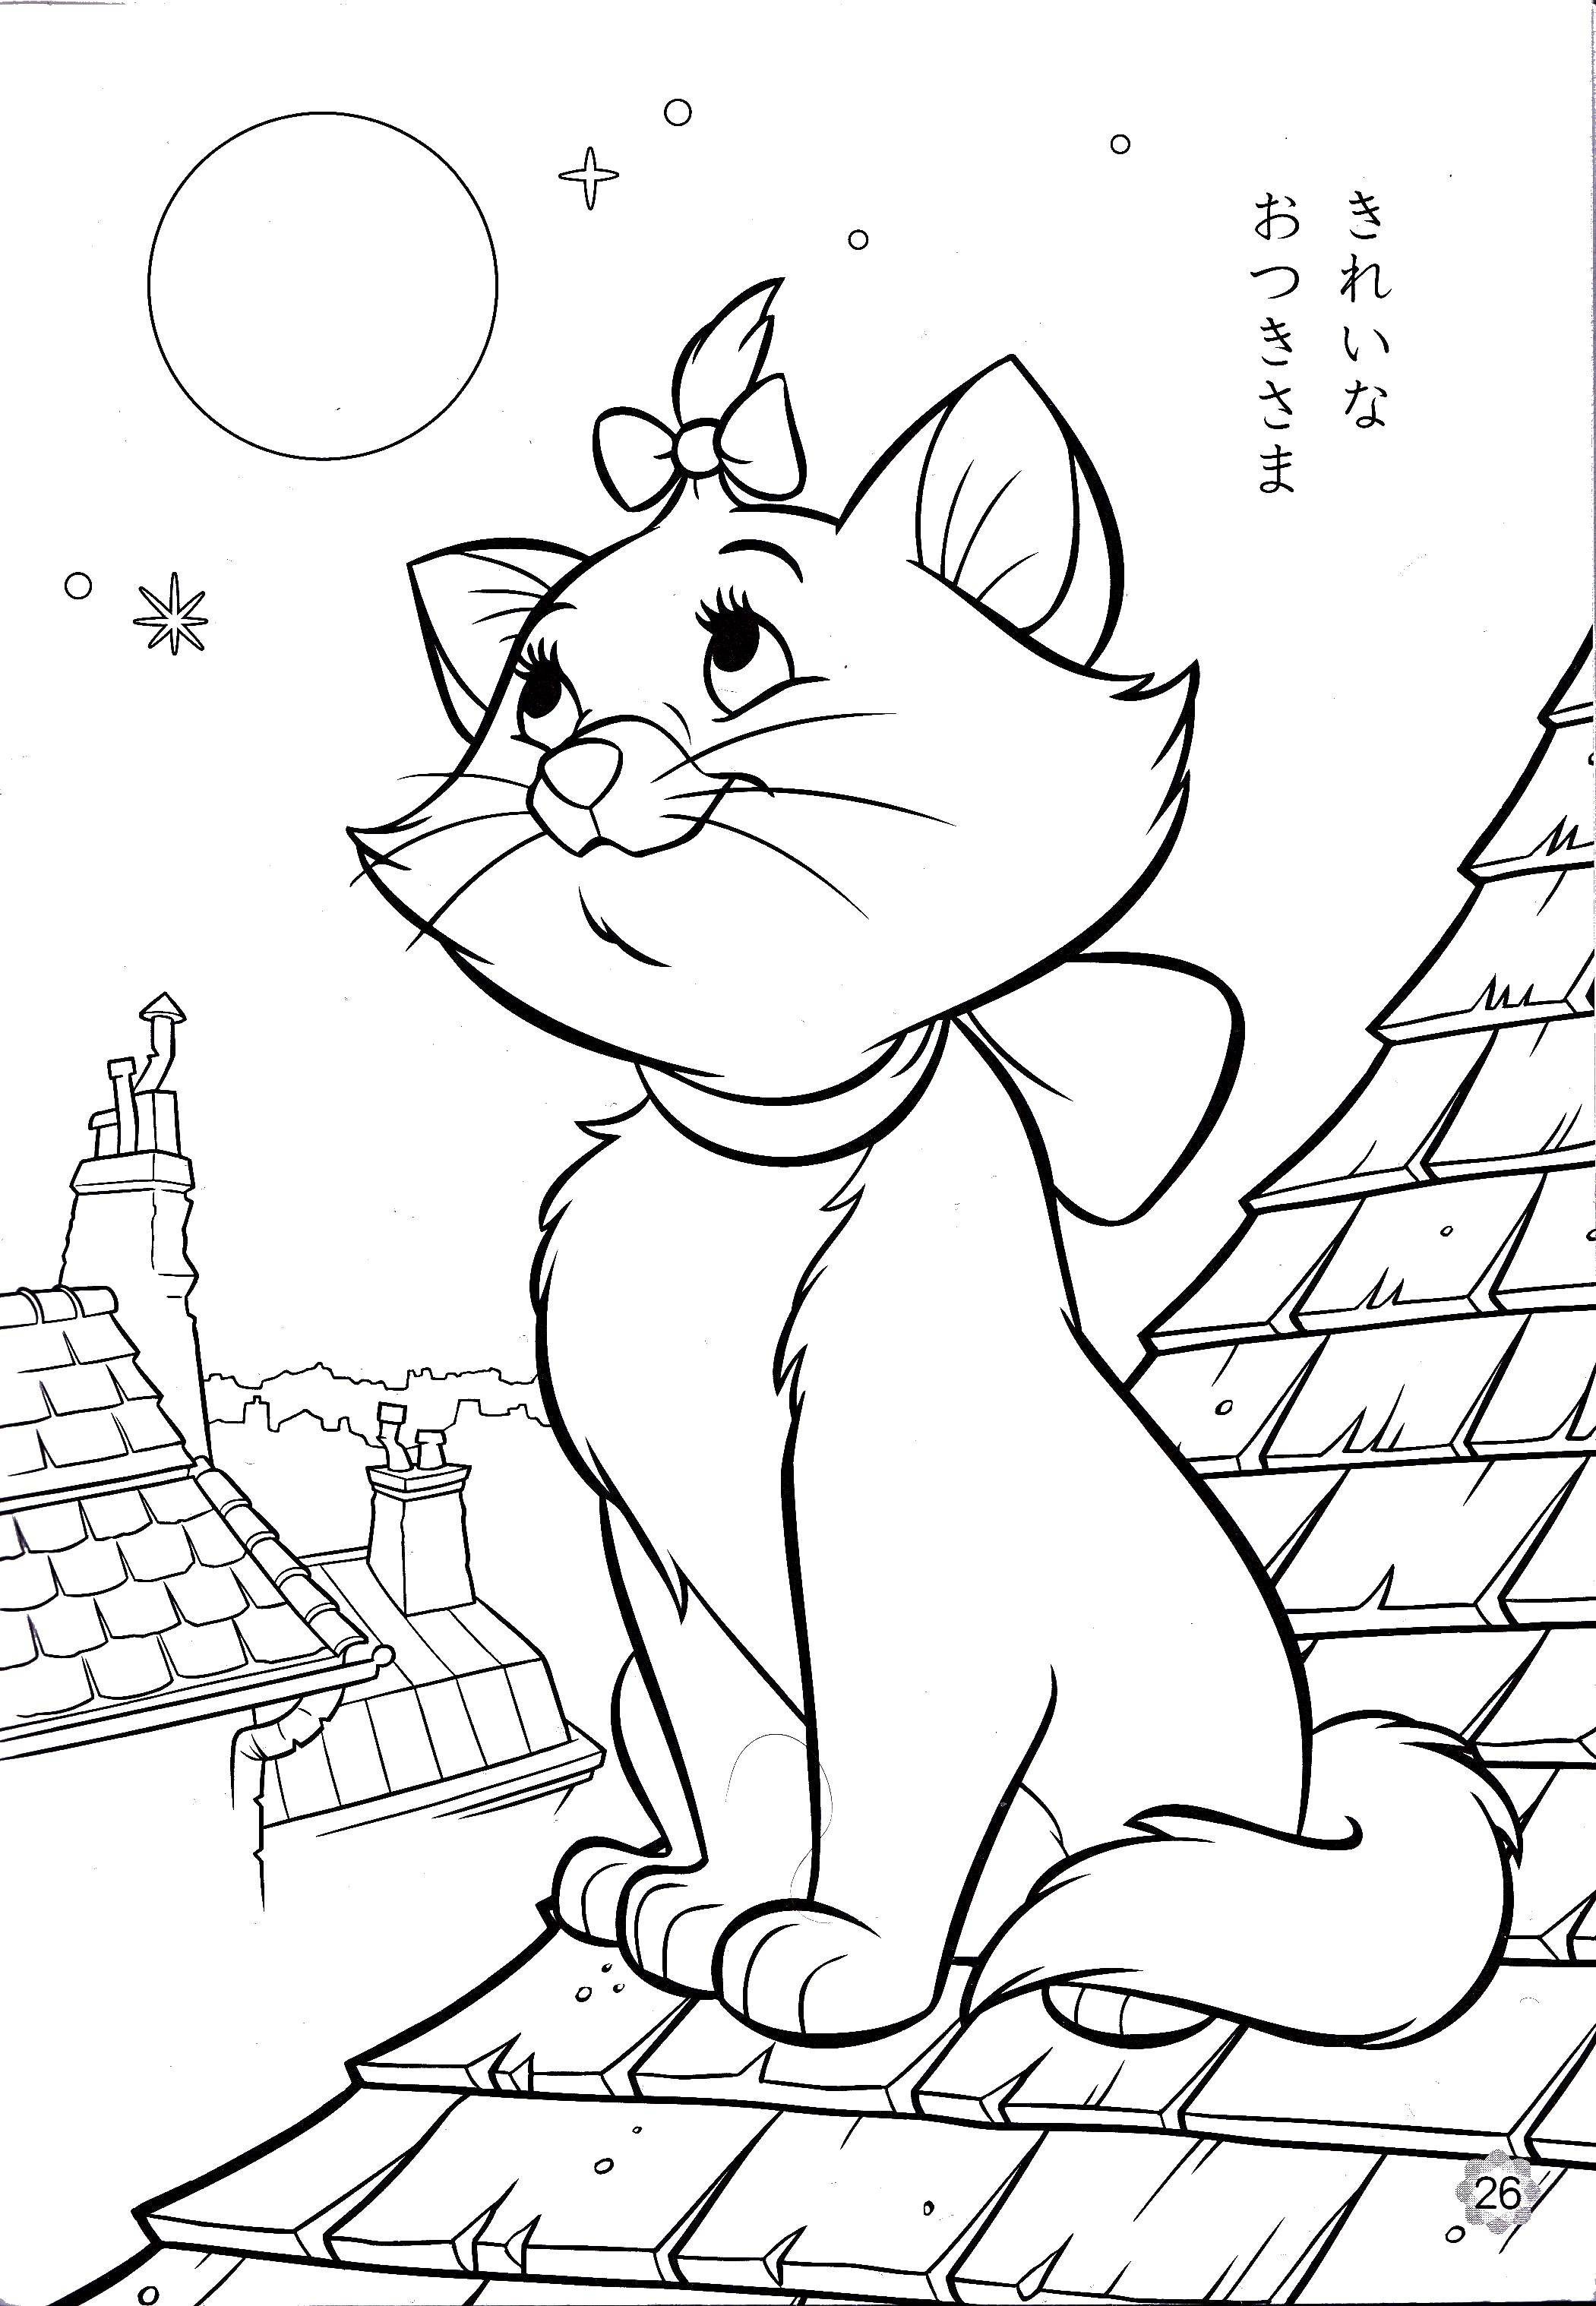 Coloring Cat on the roof. Category Disney coloring pages. Tags:  Disney cartoons, cat, kitty.